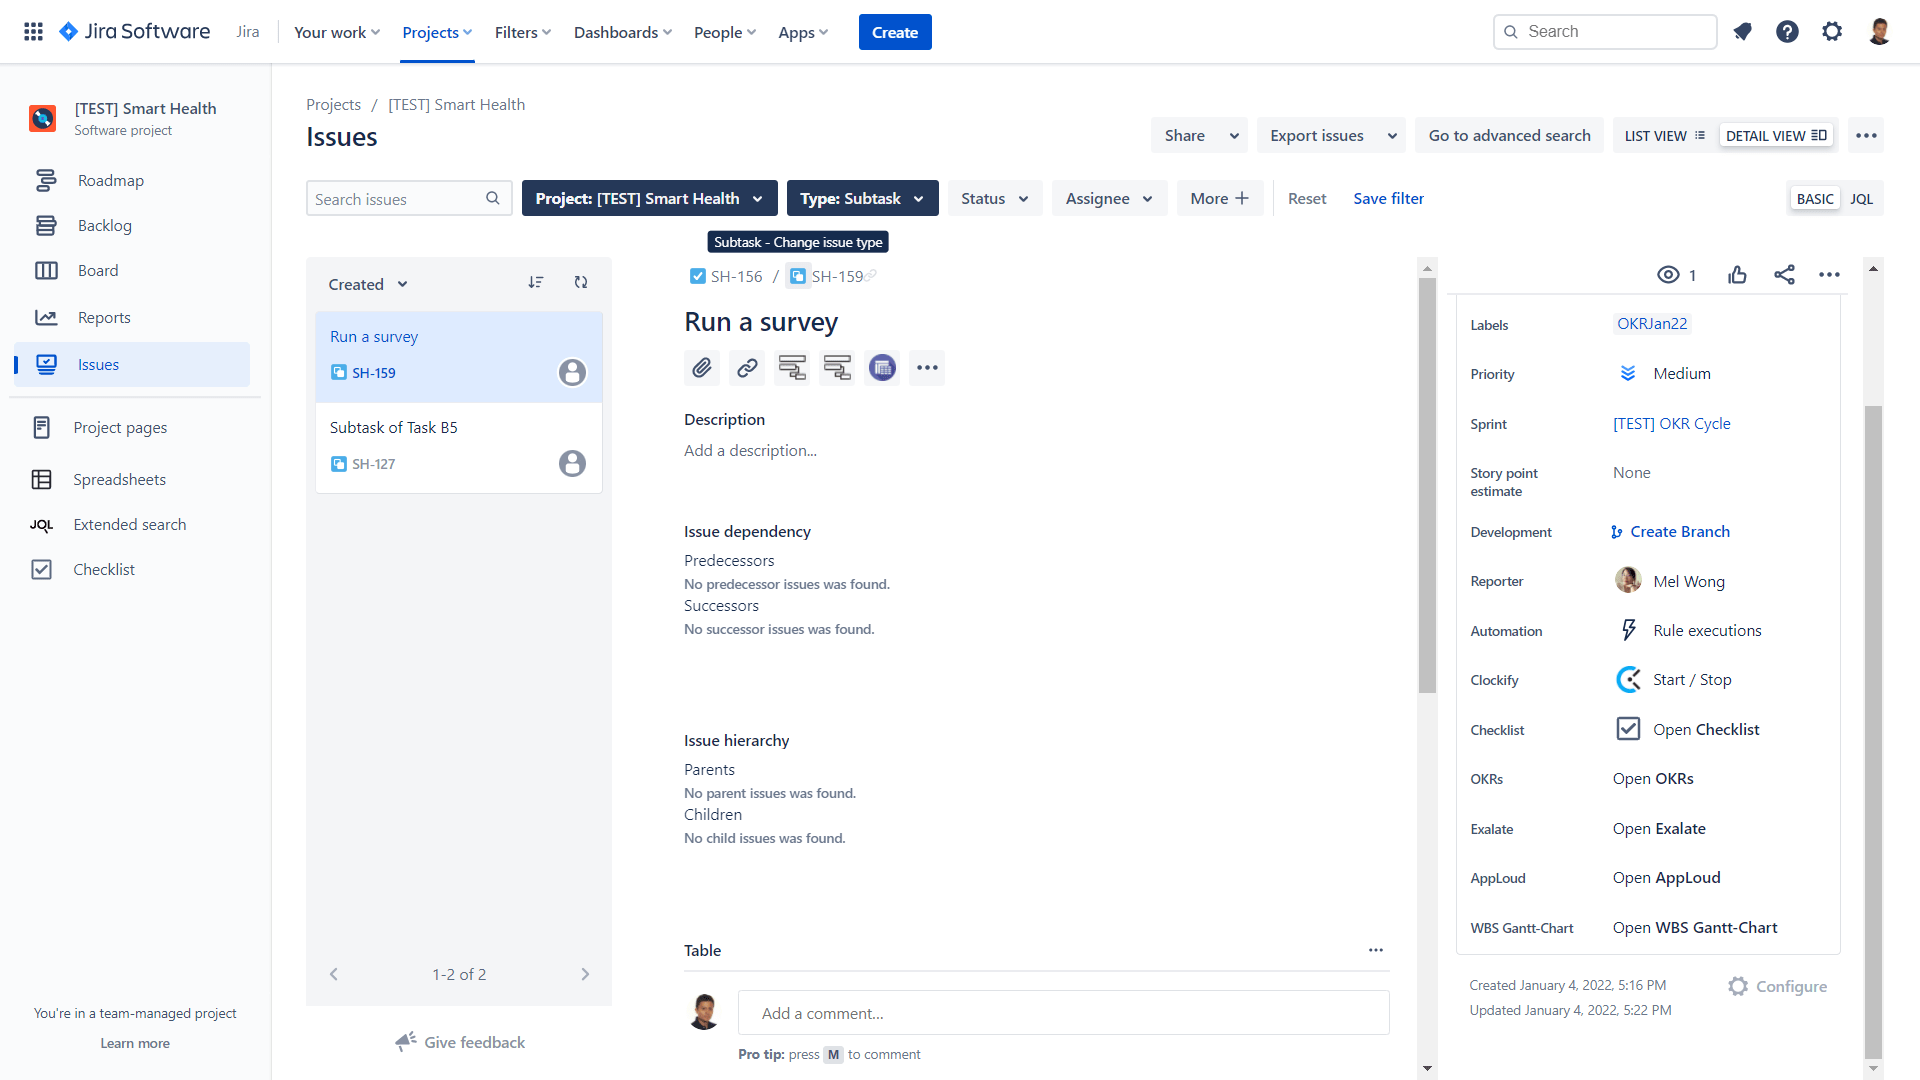 Creating sub-tasks in Jira to make a large complex project more manageable.